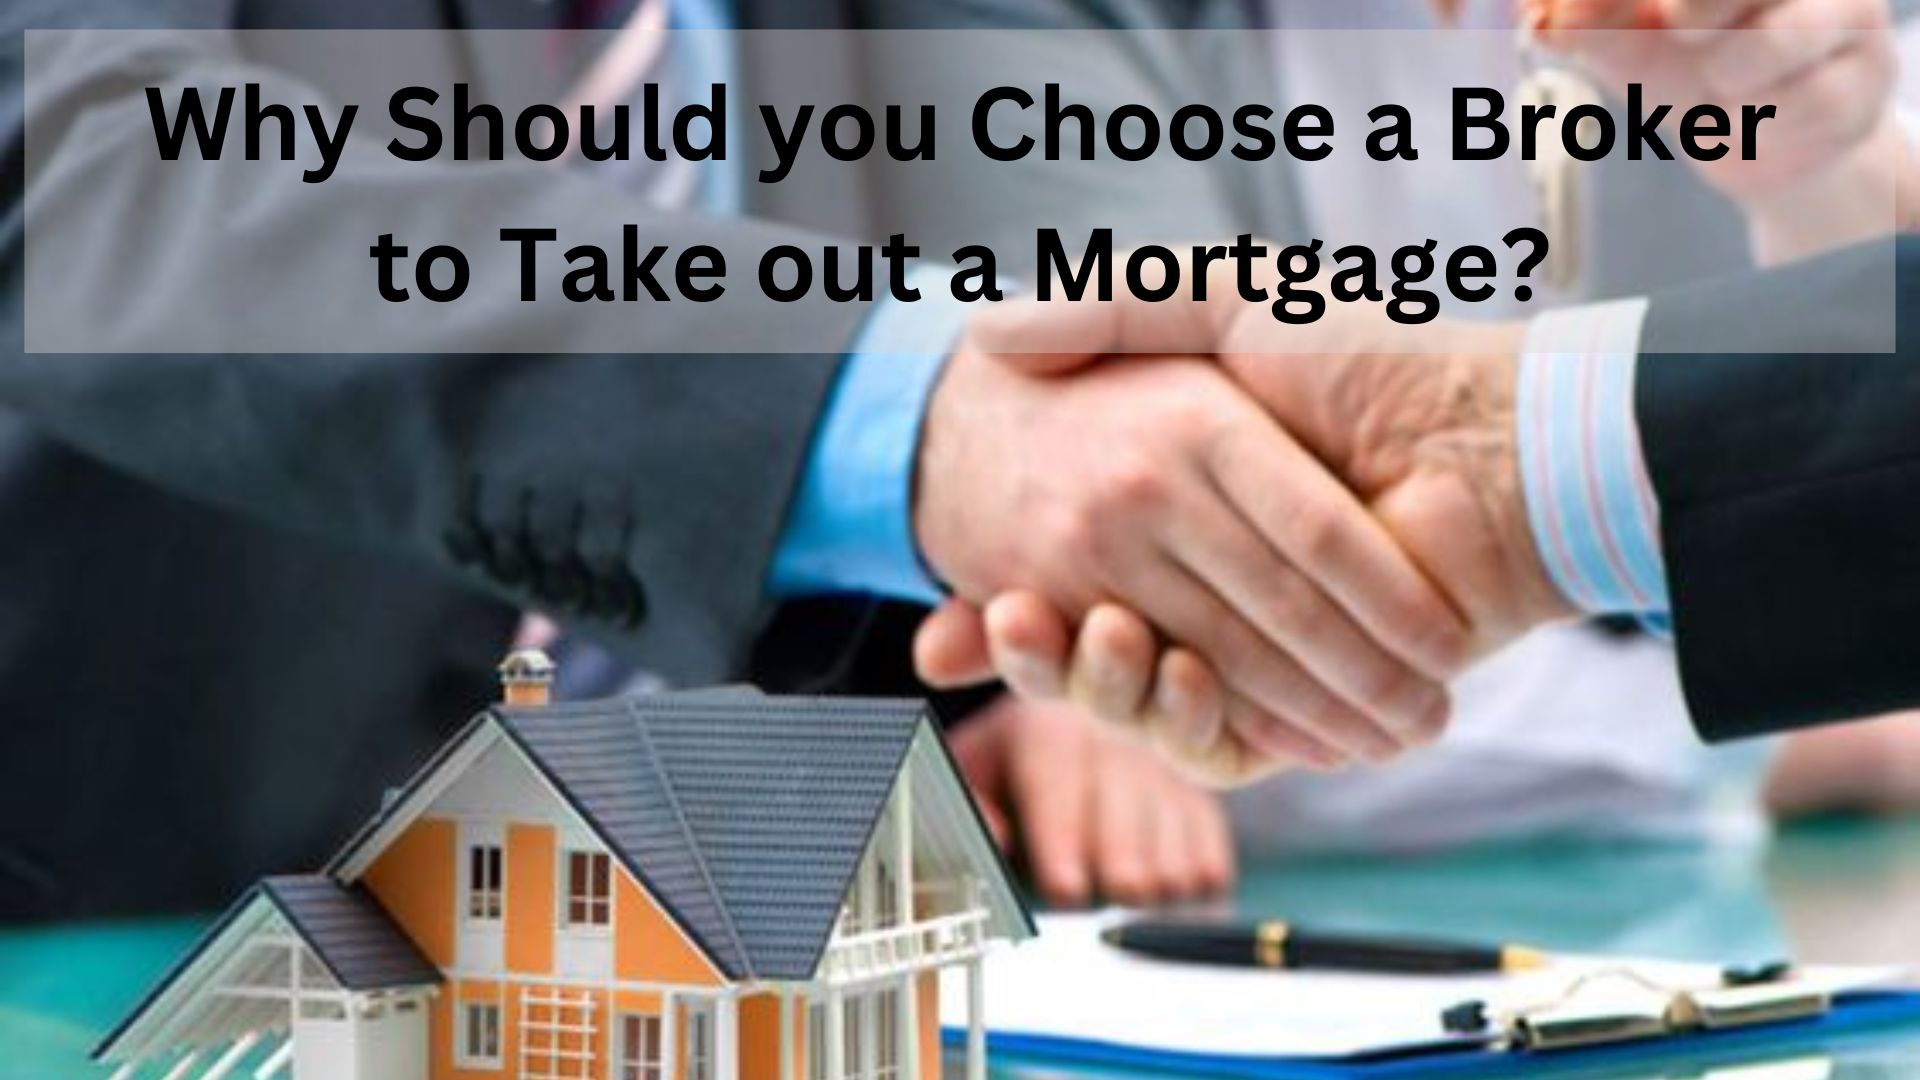 Why Should you Choose a Broker to Take out a Mortgage?